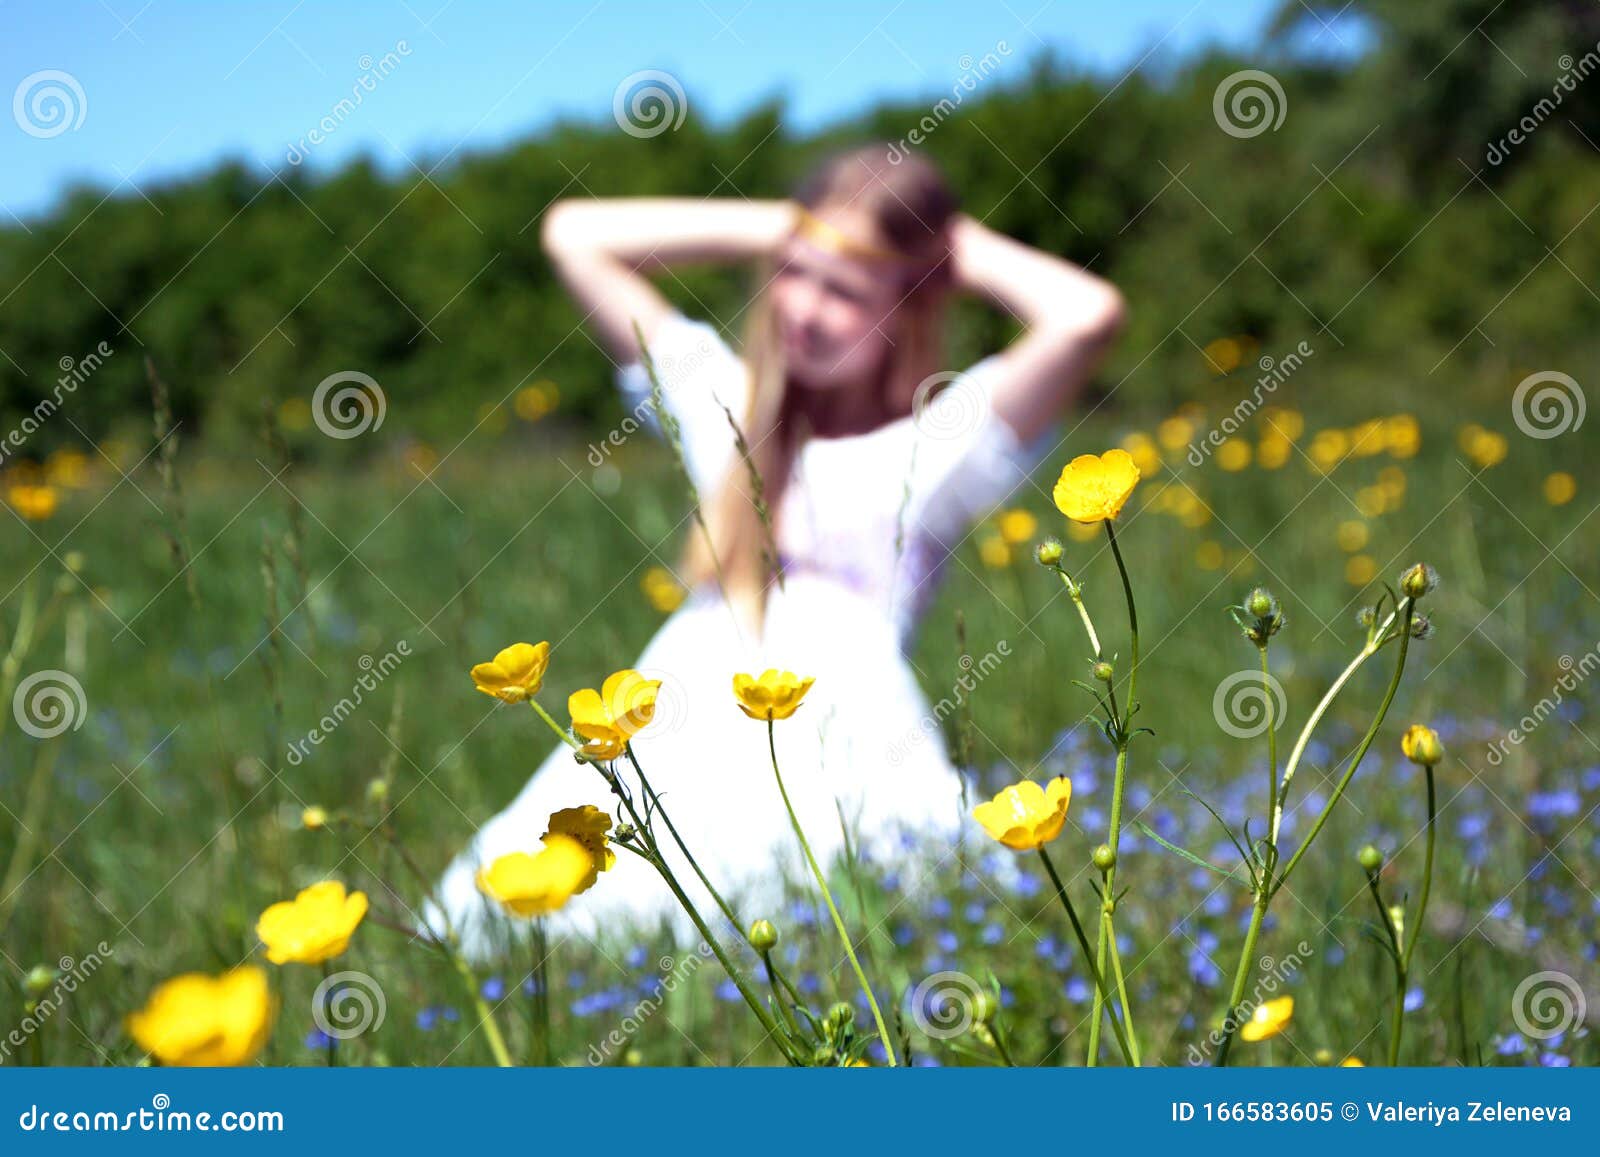 Blurred Silhouette Of A Girl Sitting On A Flowering Meadow Stock Image